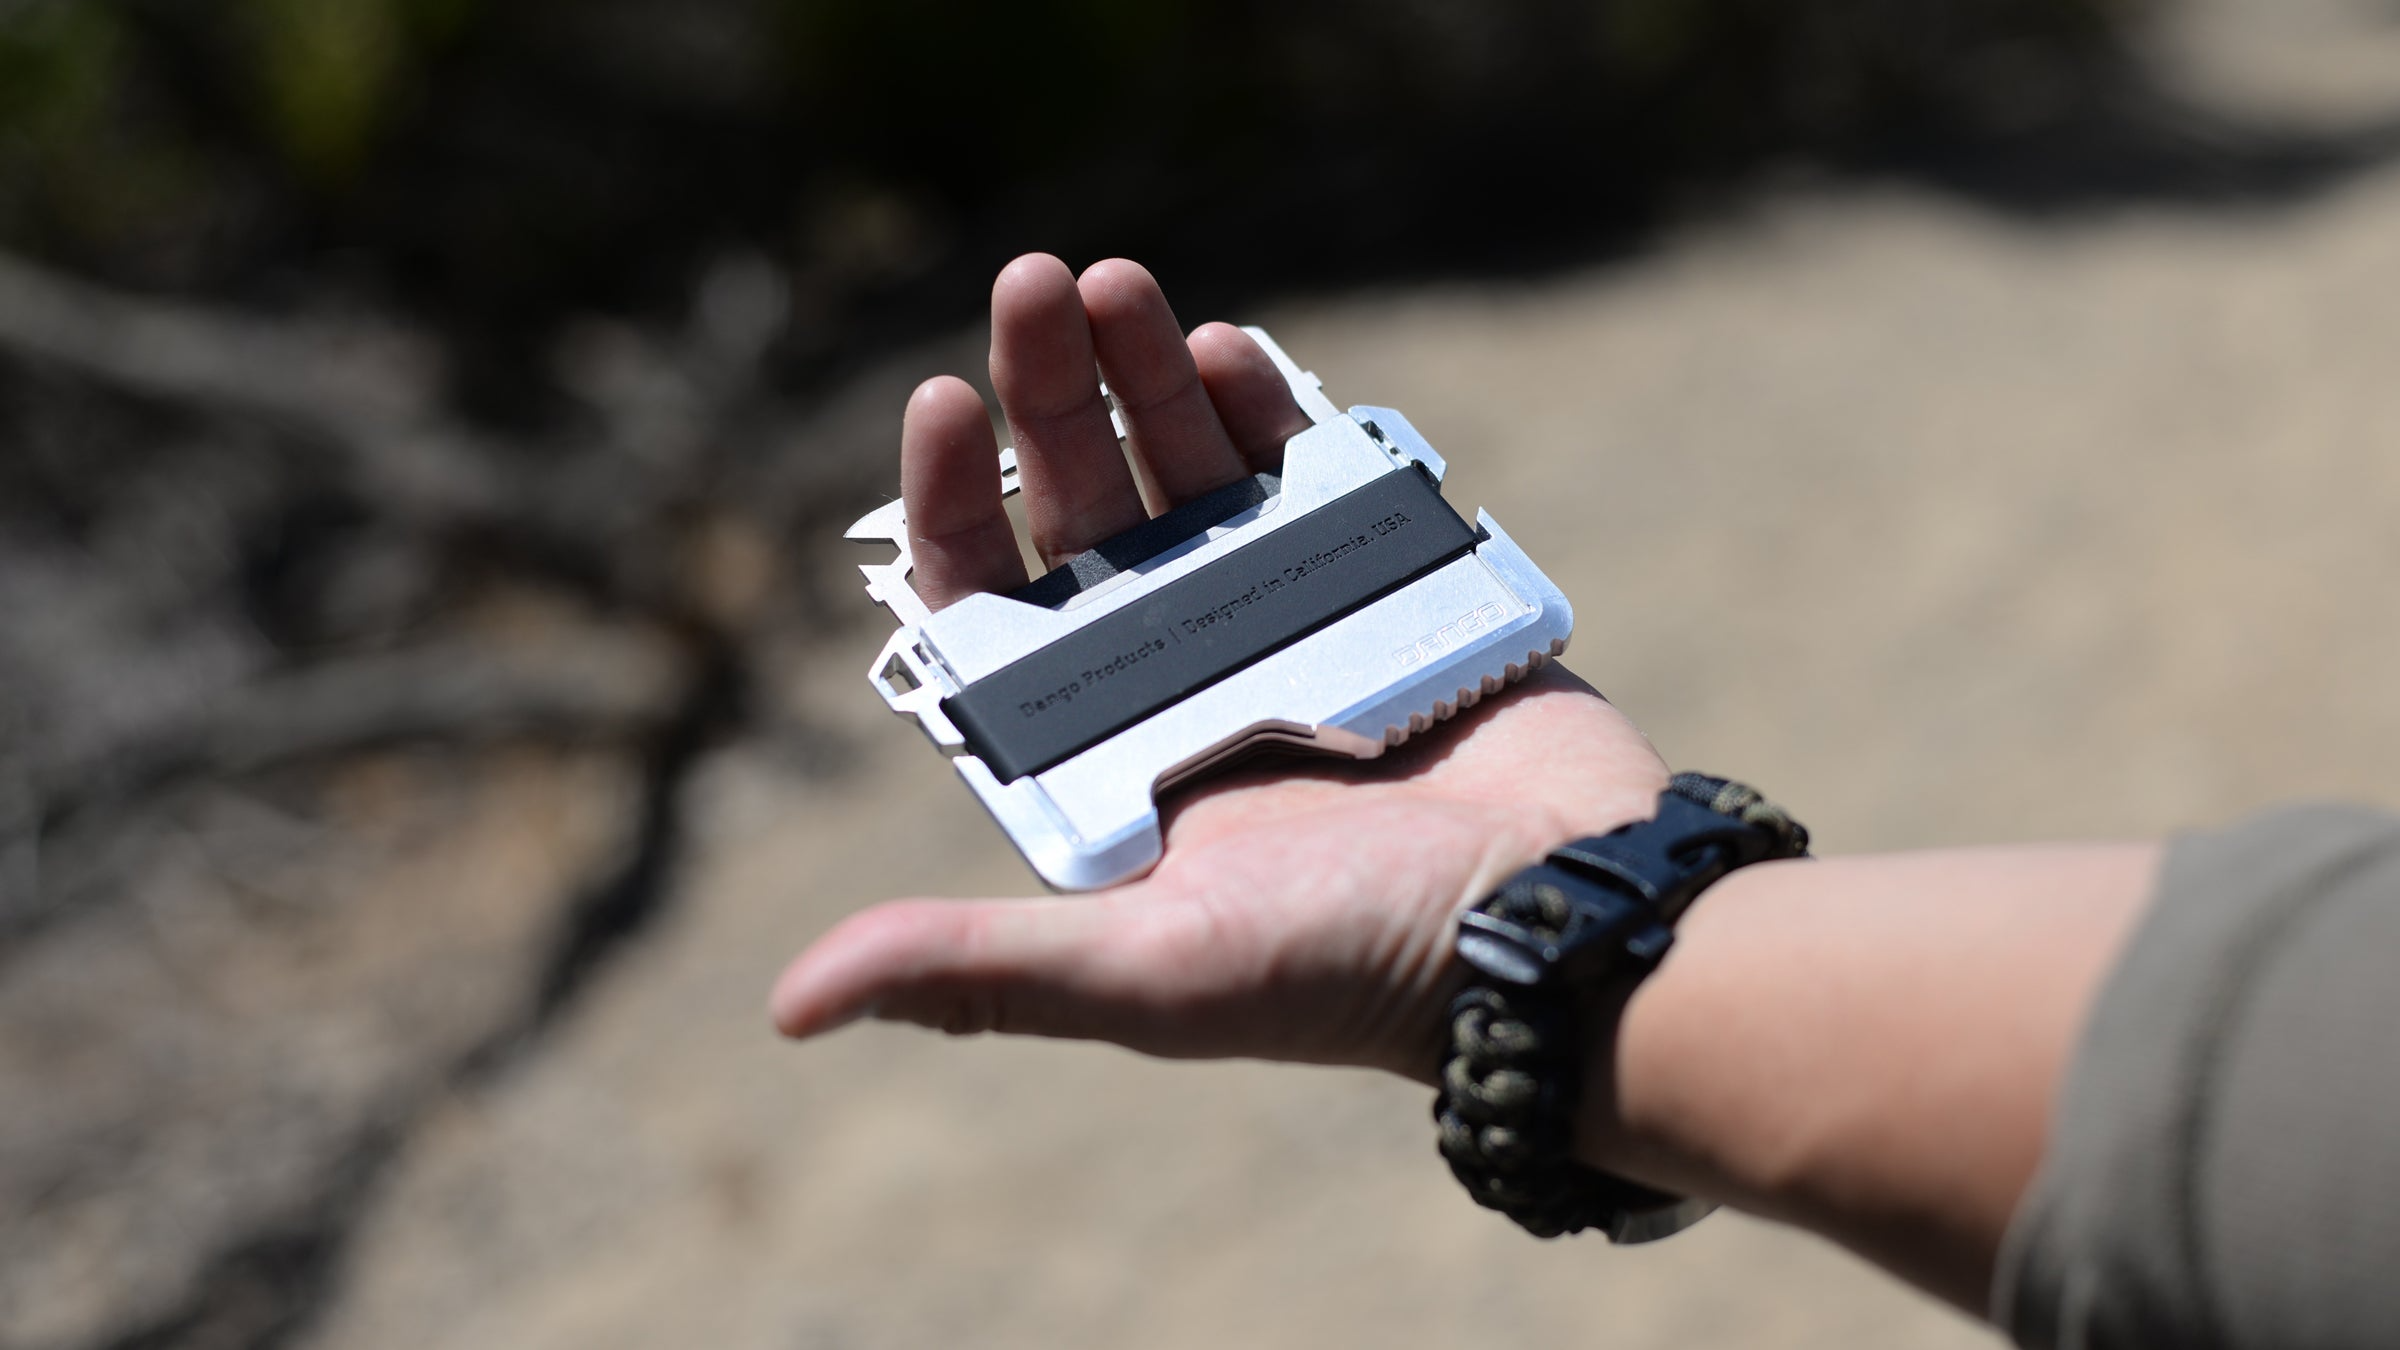 Tactical Wallets designed for practicality and functionality